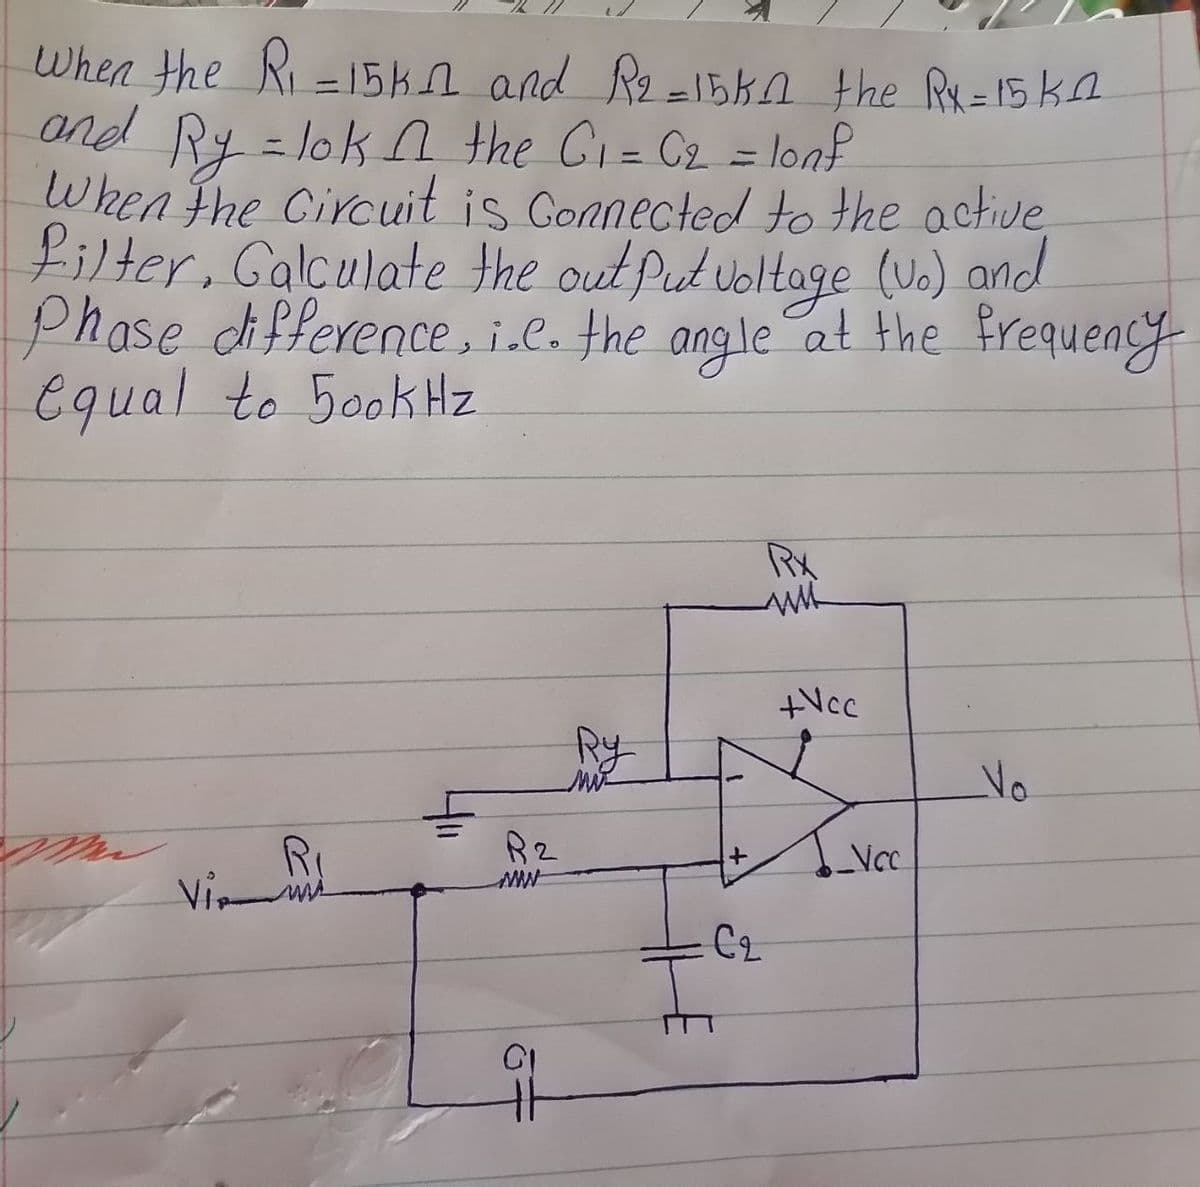 filter, Galculate the out Put voltage (Ua) and
When the Ri -15kn and Re =15kn the R=15K
and Ry =lok n the Ci= C2 = lonf
When the Circuit is Gonnected to the active
%3D
Phase difference, i.e. the angle at the frequency
Equal to 50okHz
Rx
Ncc
Ry
Vo
Vi
C2
